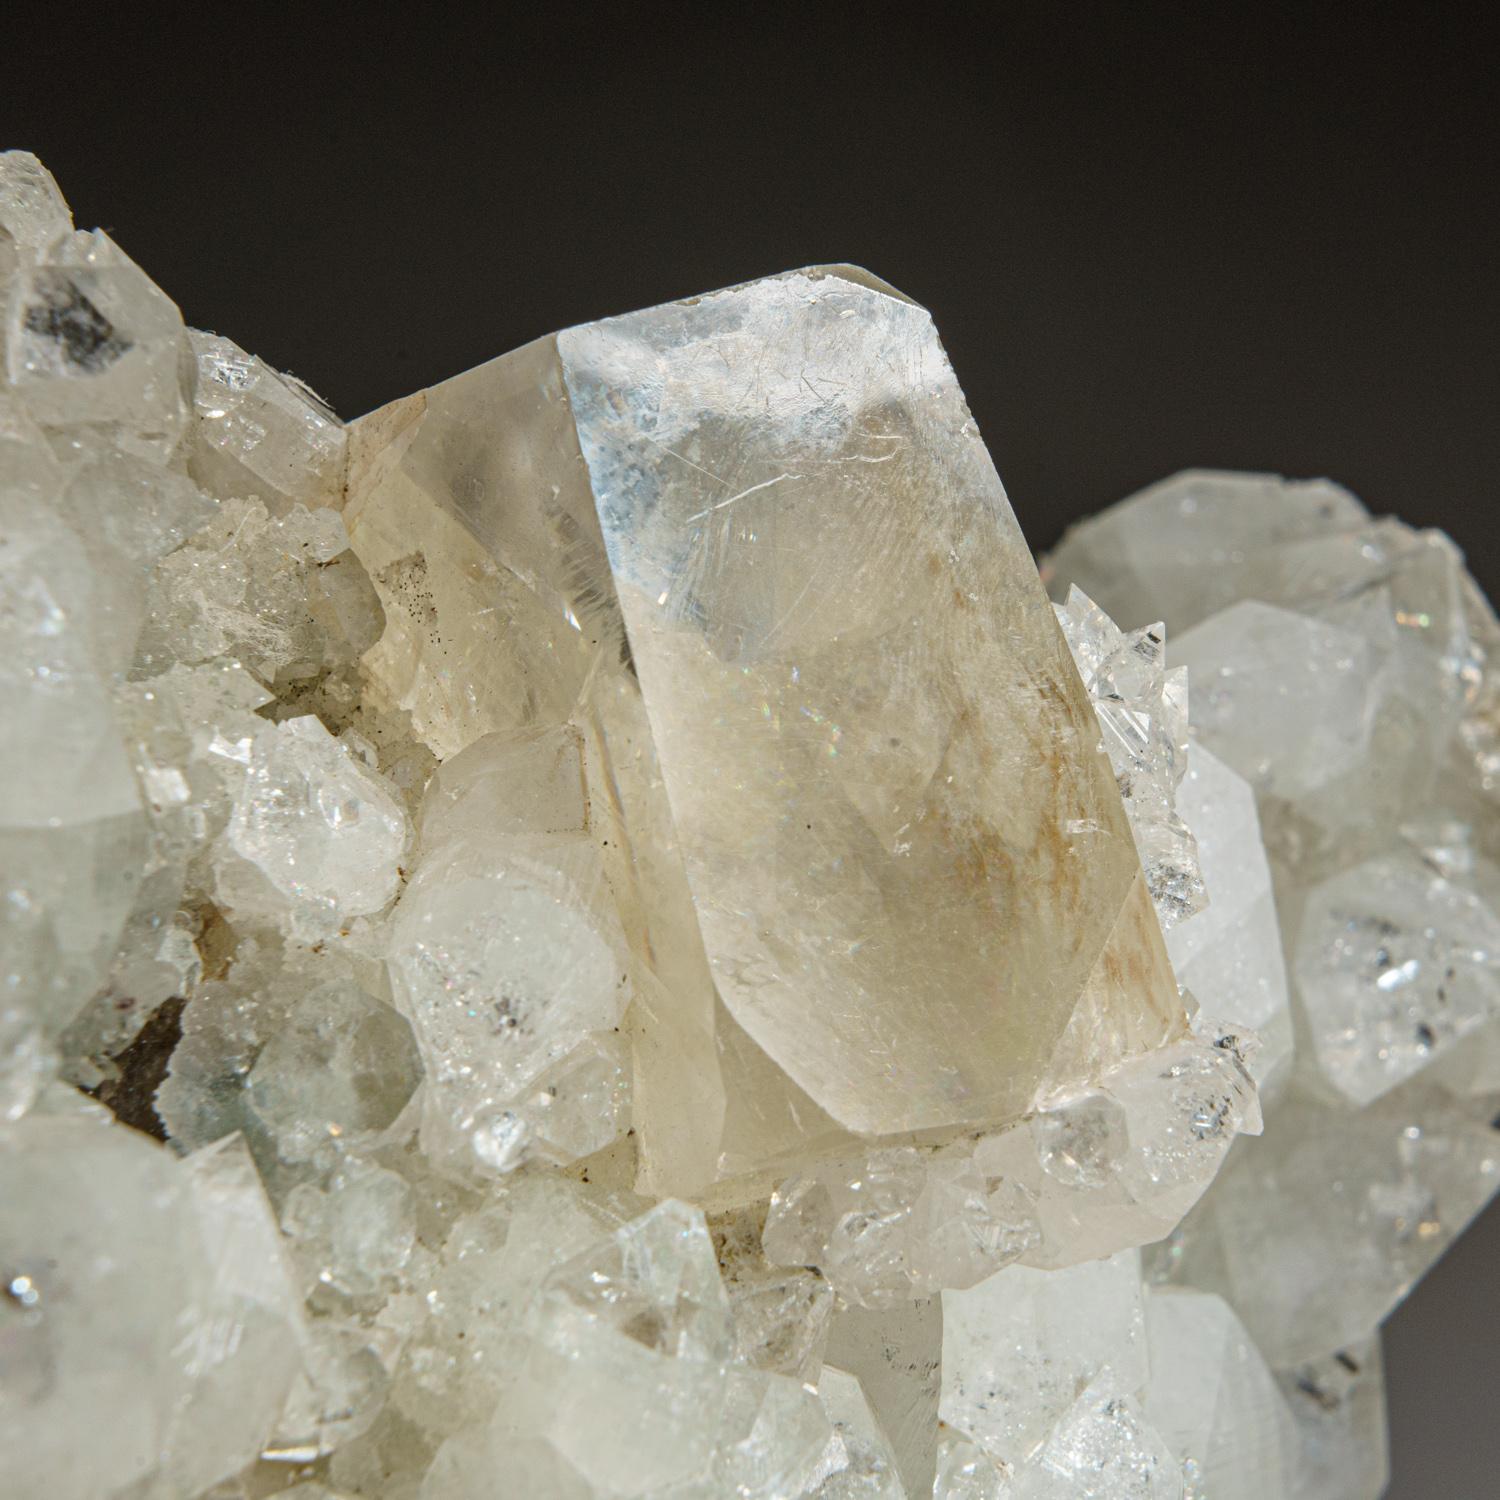 From Nasik District, Maharashtra, India

Large translucent twinned crystals of calcite on translucent to transparent apophyllite crystal cluster matrix in wheat sheave aggregates. The calcite has rich golden color with sharp terminations and a waxy